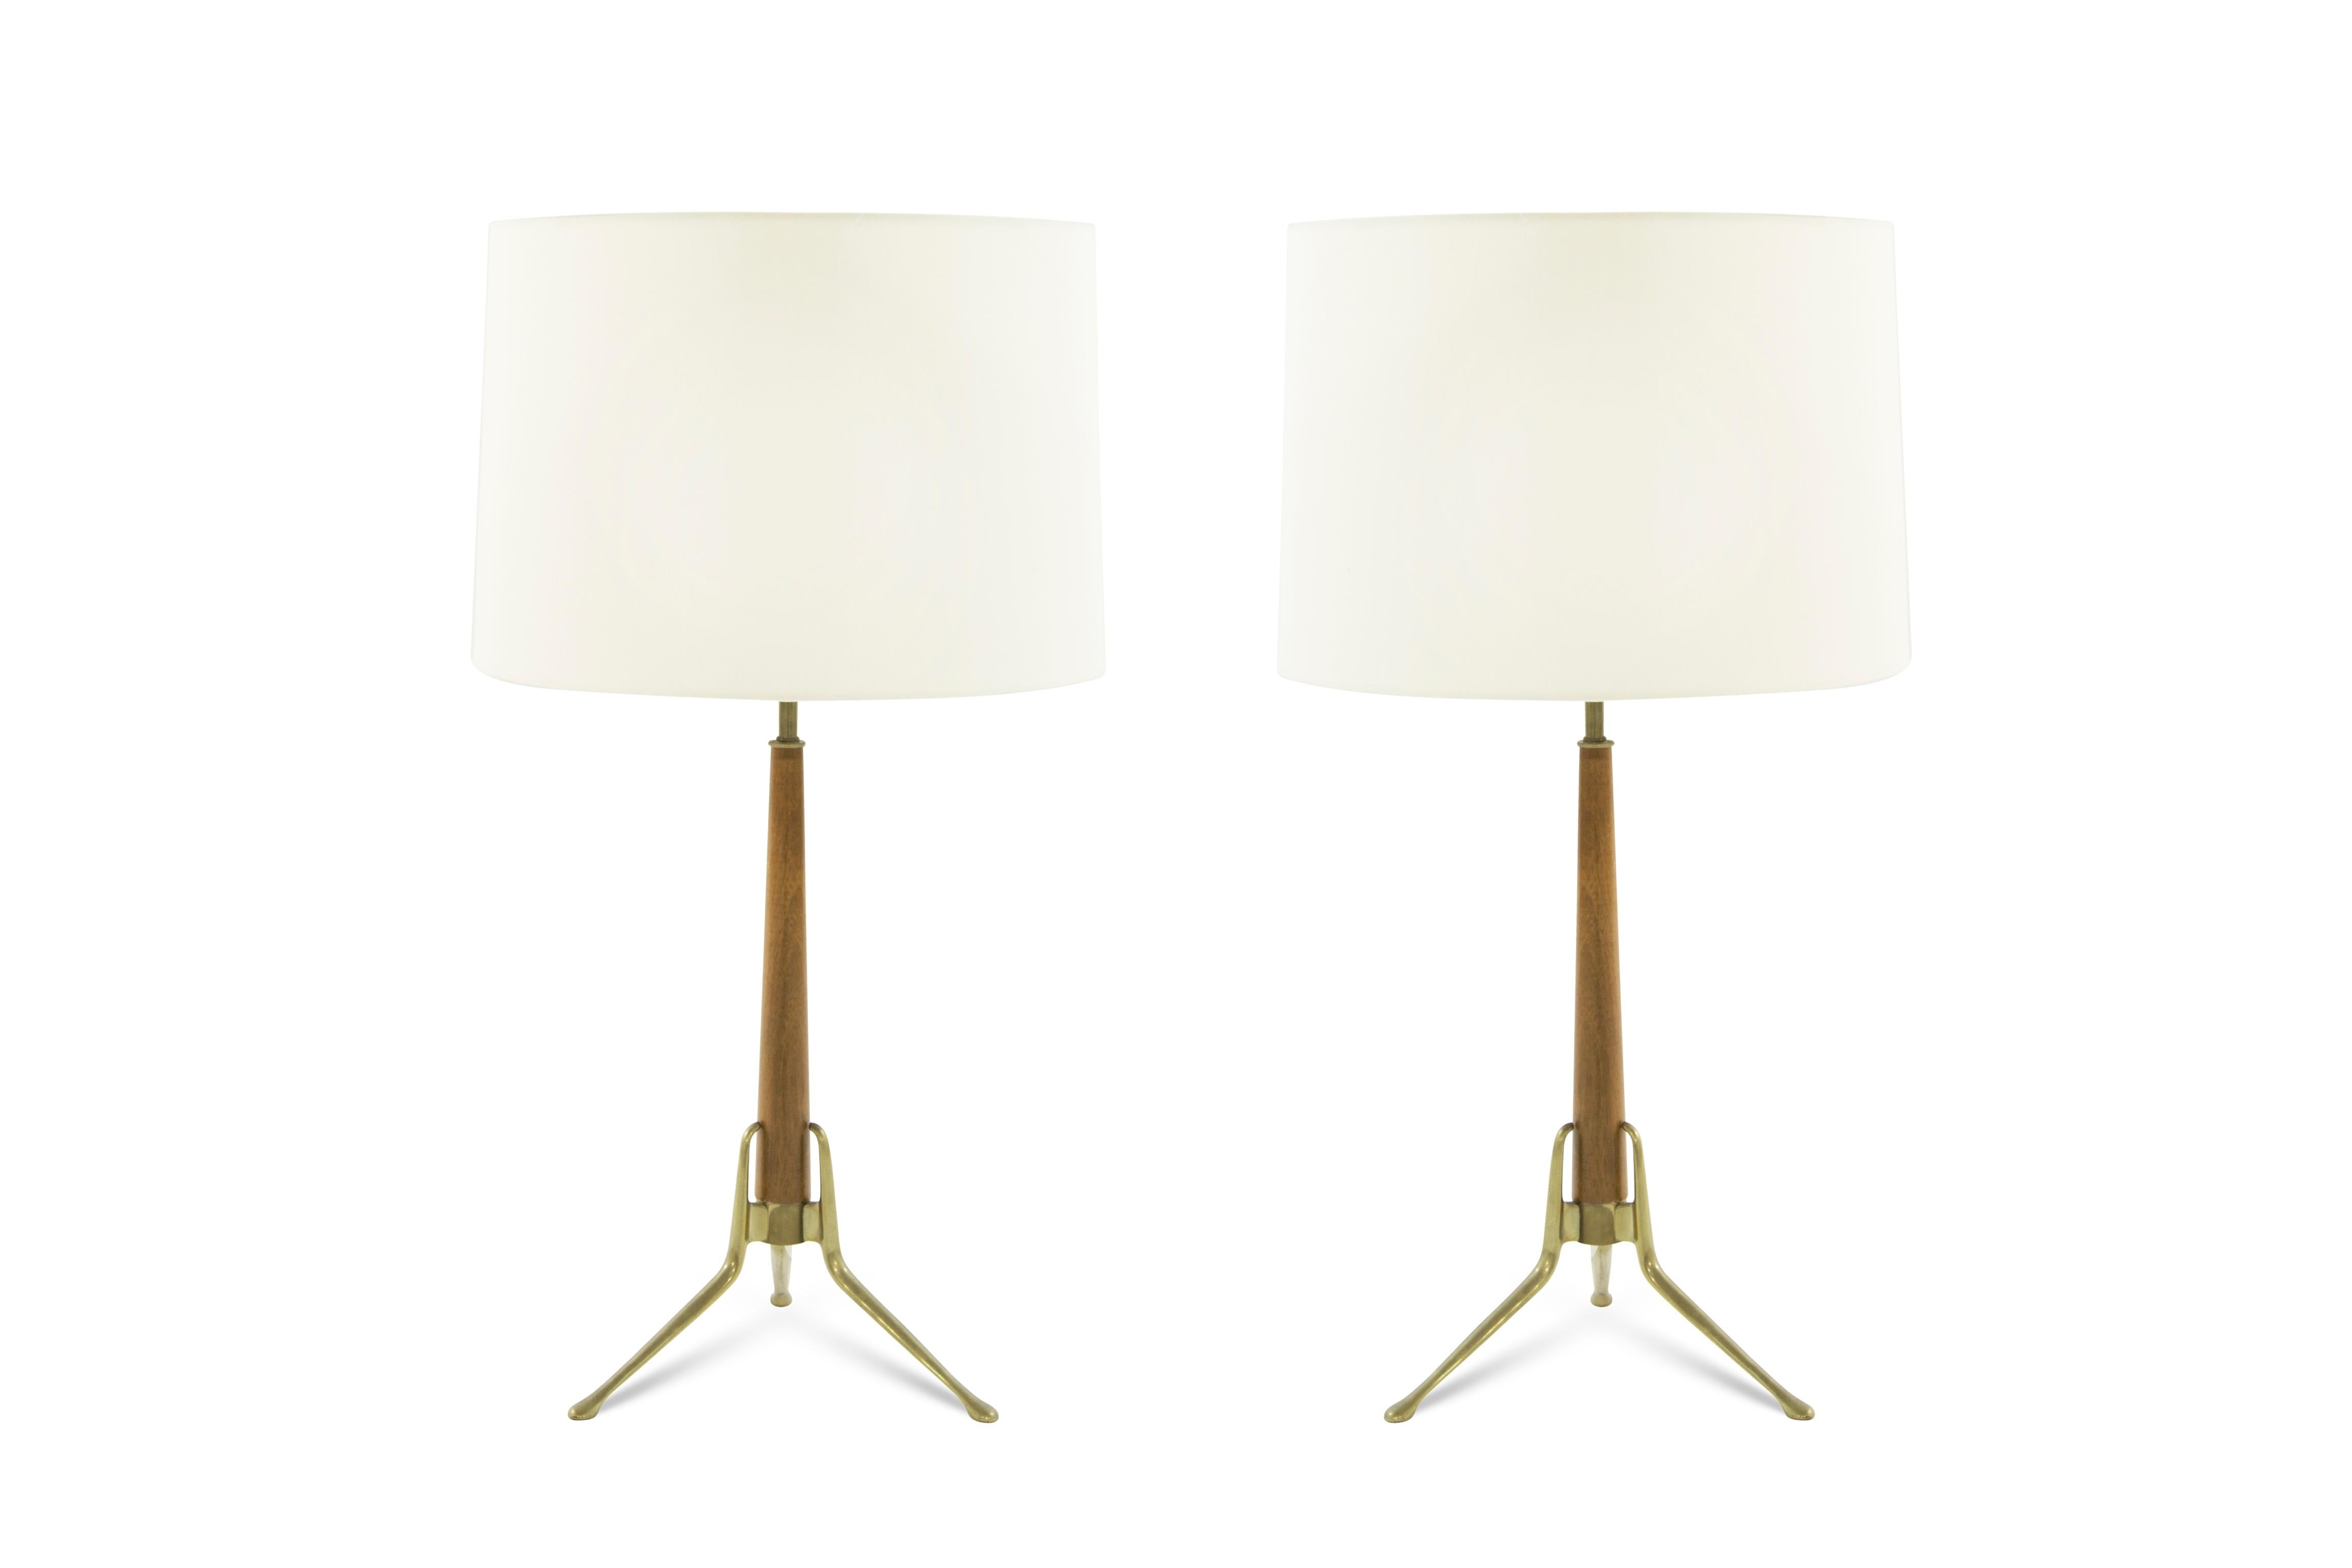 Set of walnut table lamps on brass tripod bases designed by Gerald Thurston for Lightolier, circa 1950s.

Fully rewired.